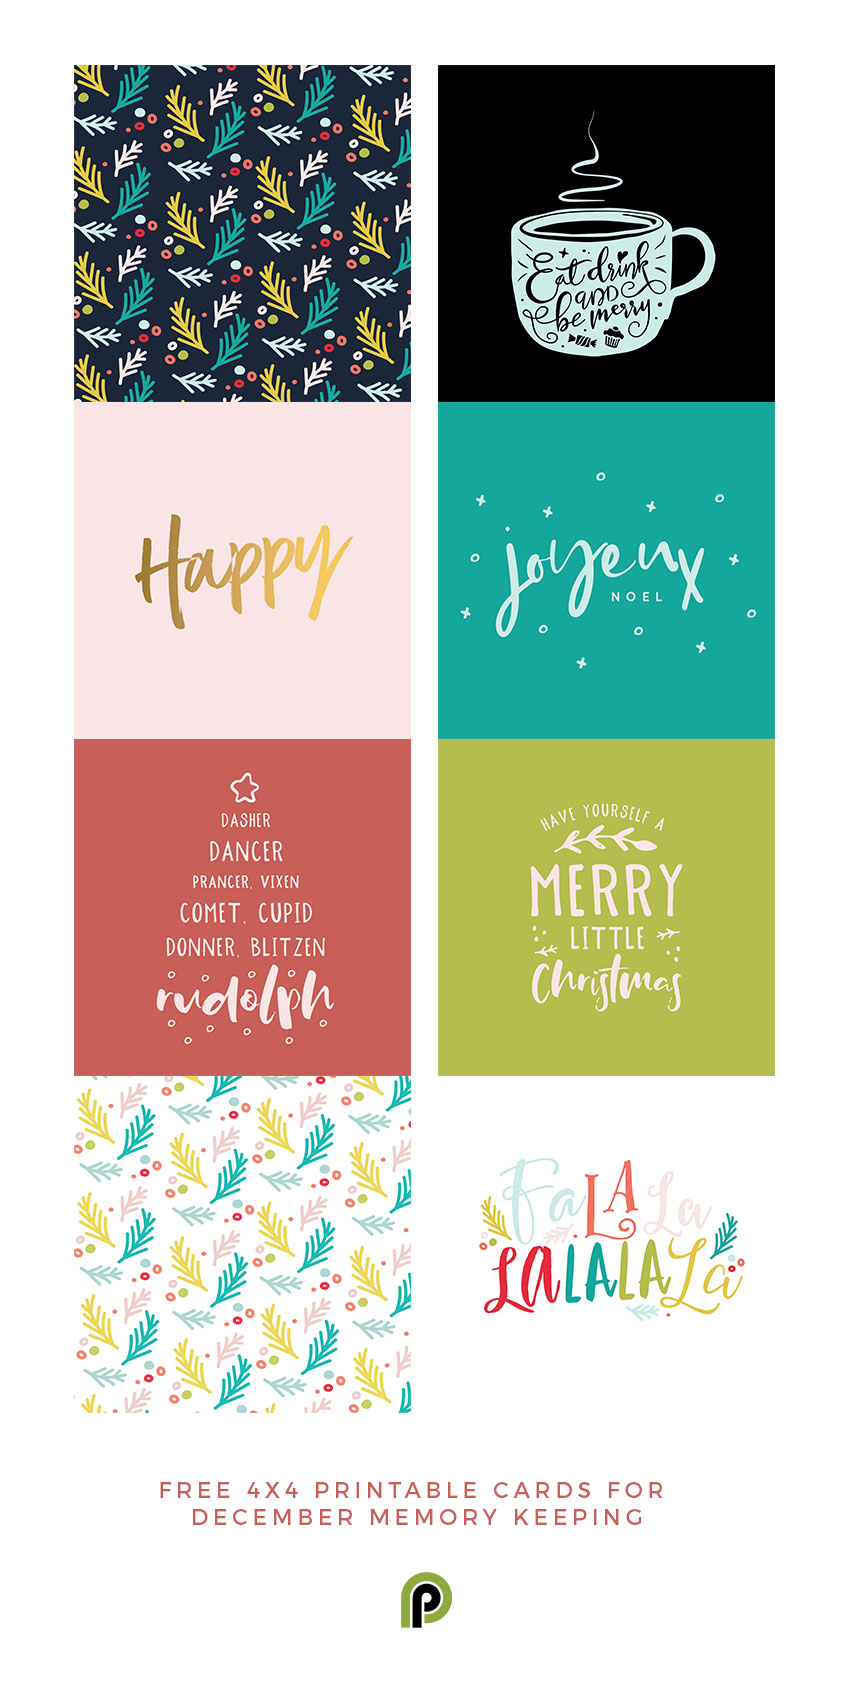 December Daily: Download Free Cards